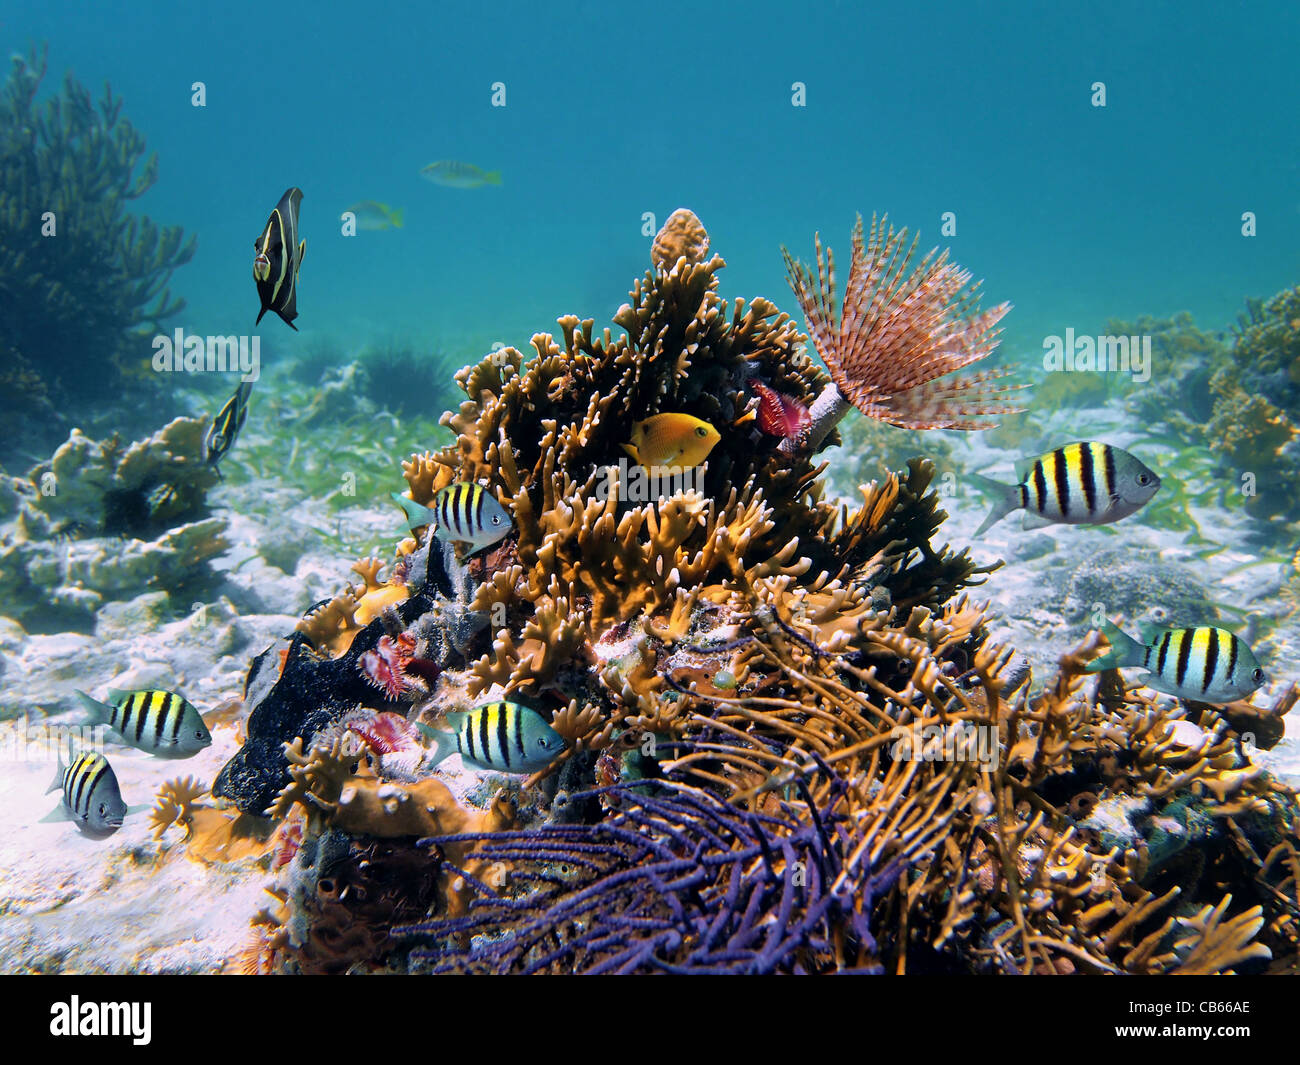 Sea life underwater with coral, marine worm and tropical fish in the Caribbean sea, mexico Stock Photo